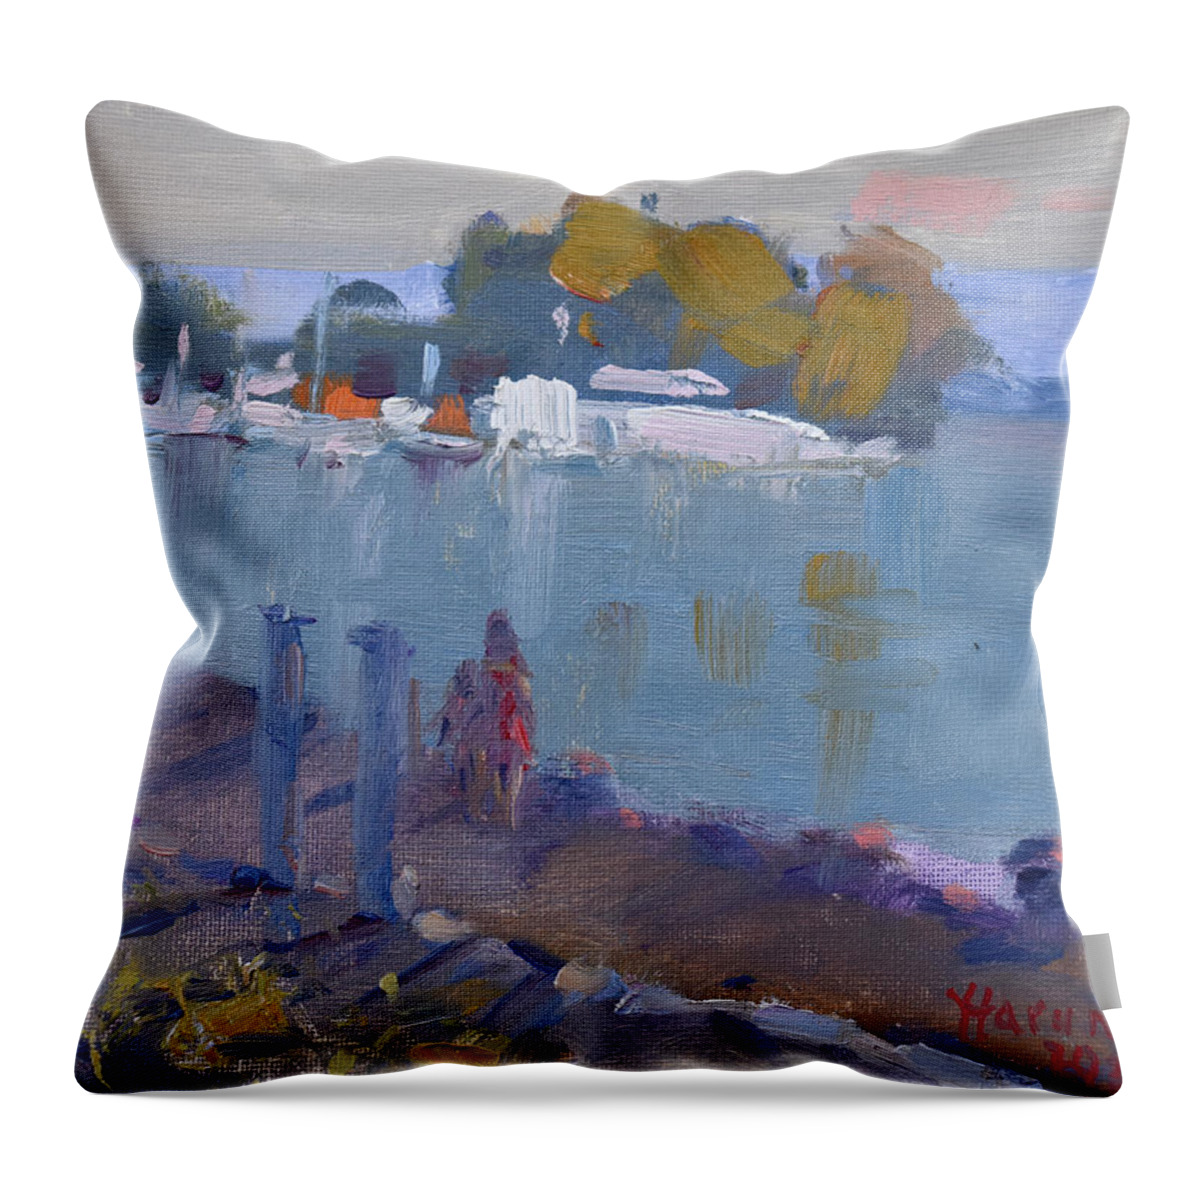 Evening Throw Pillow featuring the painting Evening at the Old Harbor by Ylli Haruni